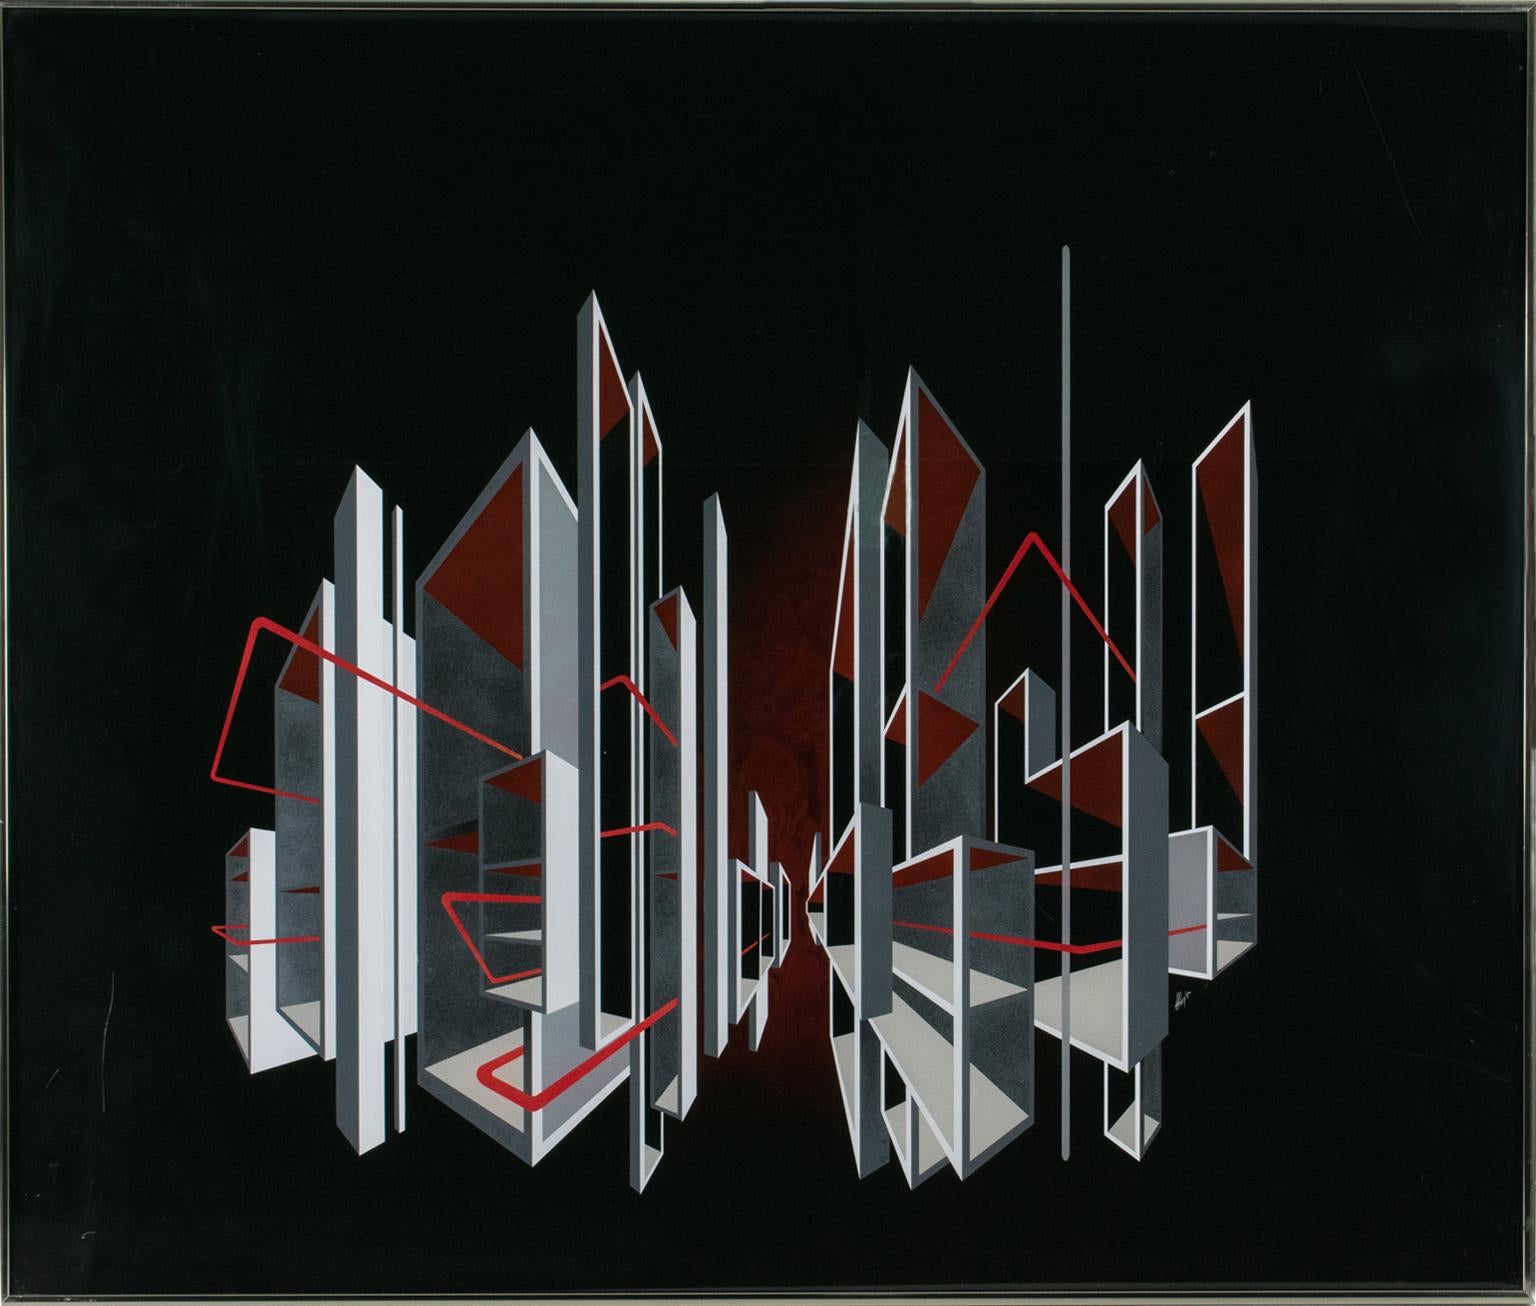 A striking composition created by American artist L. L. Long and dated 1980. The artwork features a kinetic optical Op Art geometric cityscape design using reverse spray paint on a Lucite or Plexiglass board. The composition incorporates contrasted